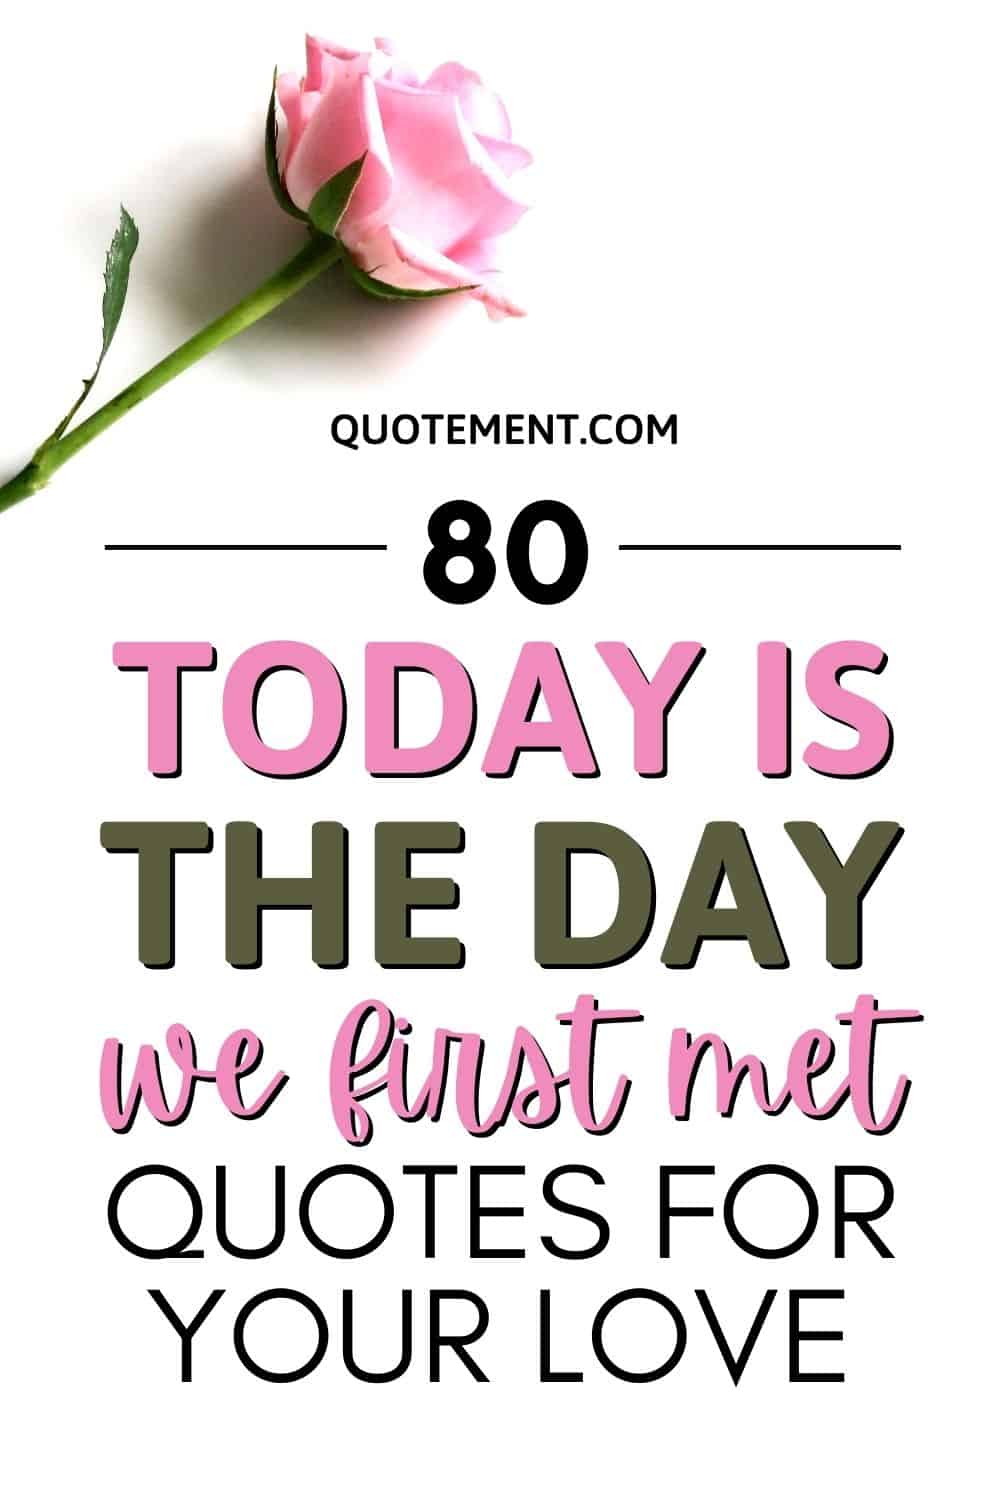 80 Today Is The Day We First Met Quotes For Your Love